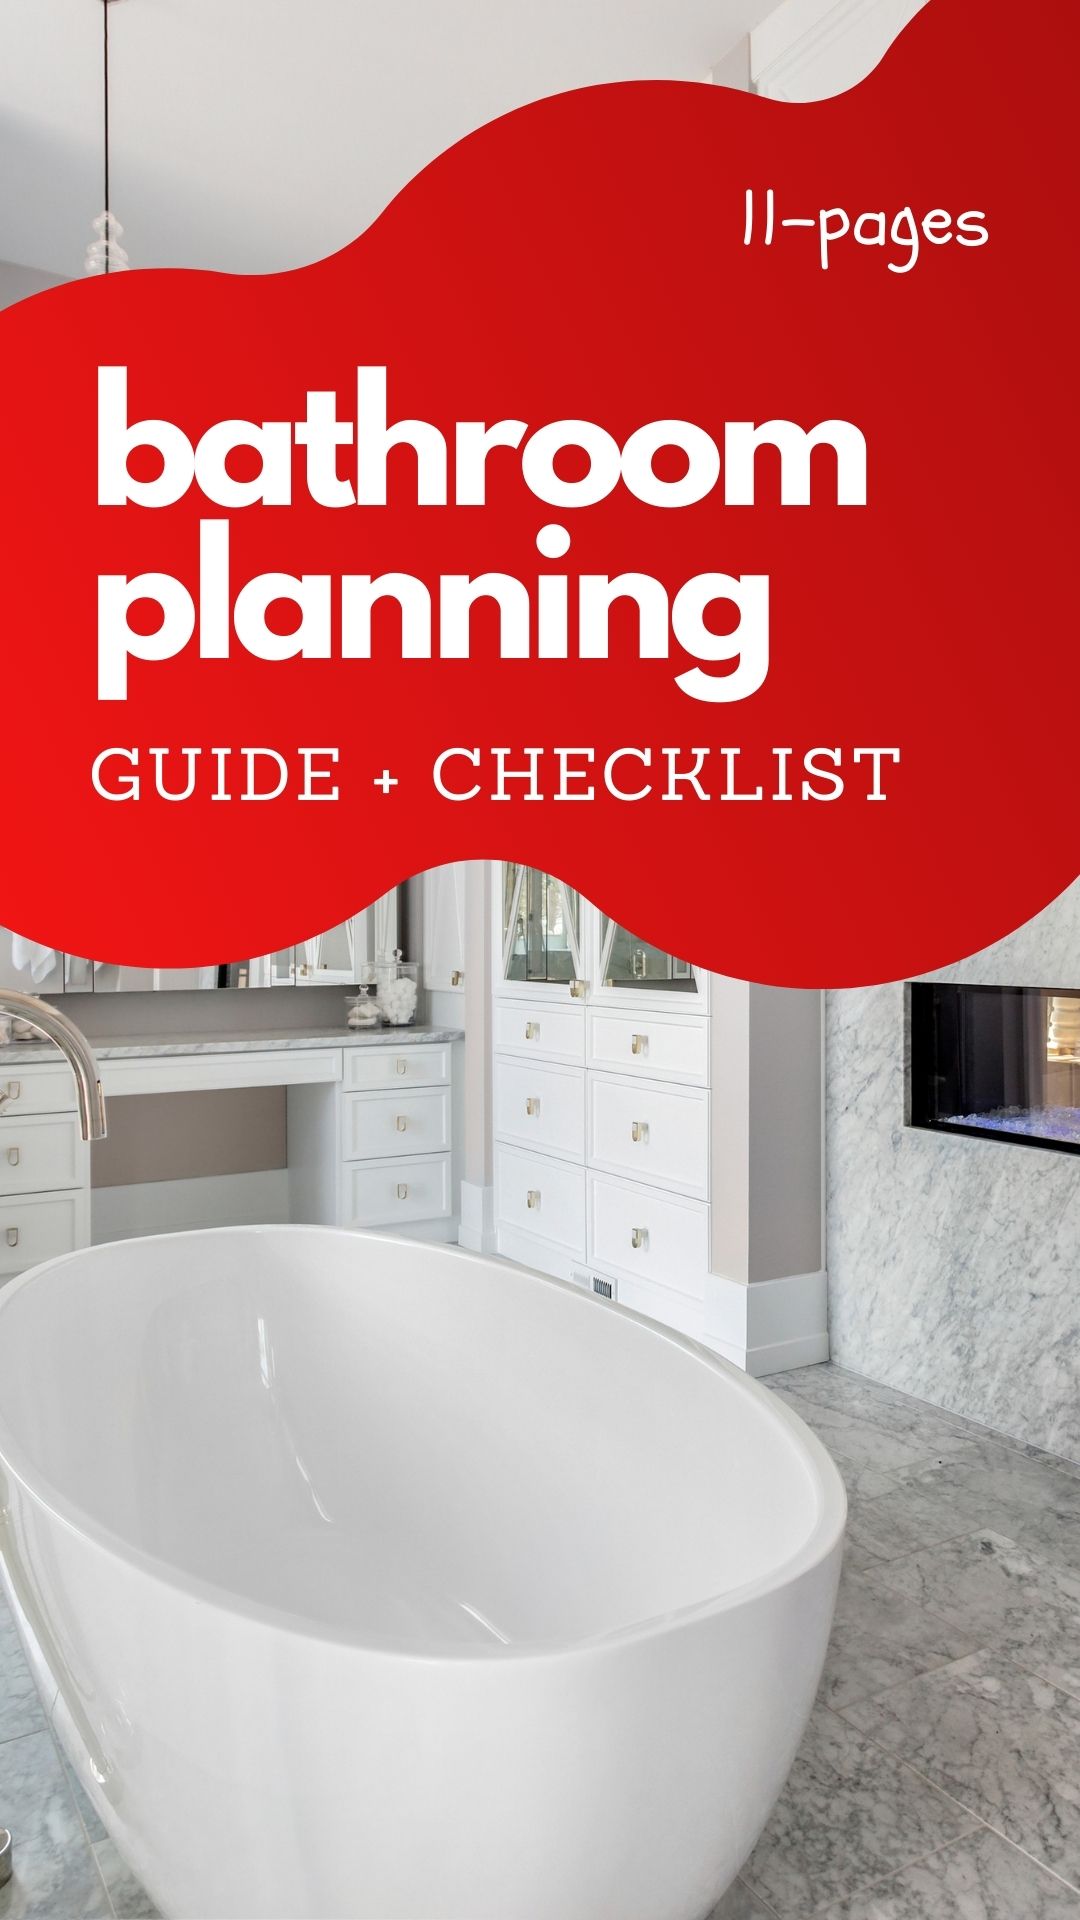 Bathroom Planning Guide - Free Download